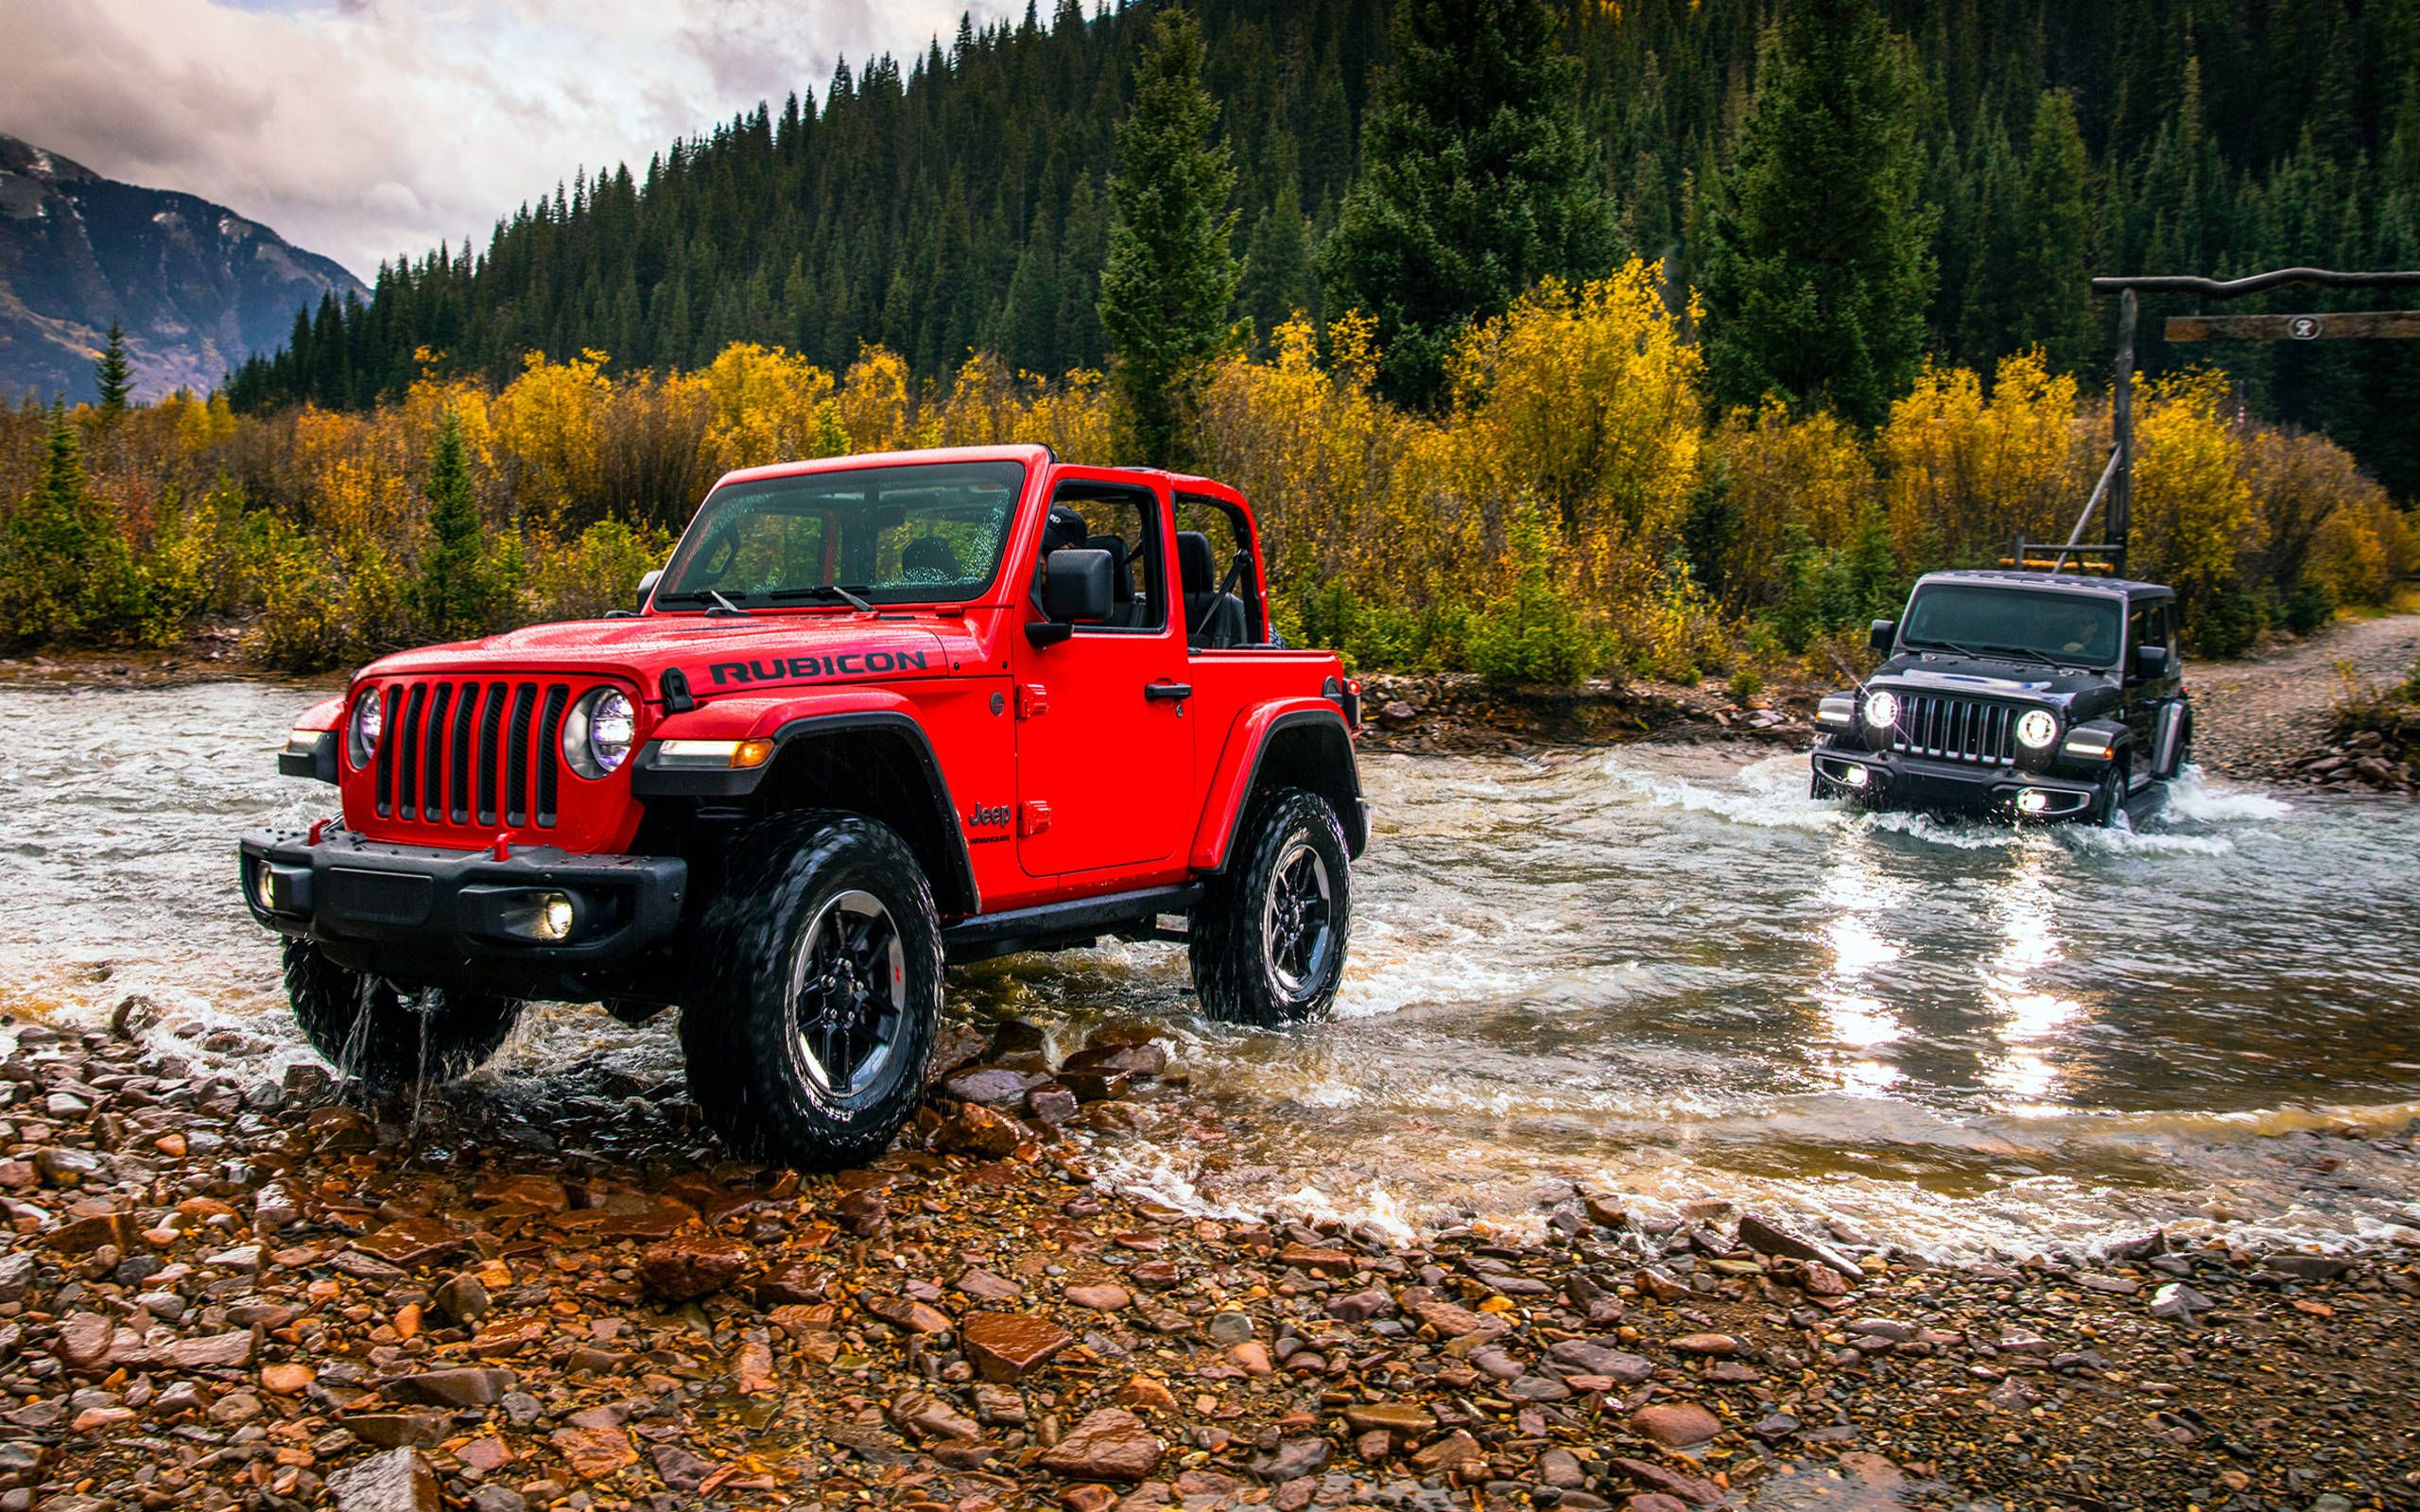 2018 Jeep Wrangler JL revealed: Get all the details about America's new  favorite off-roader